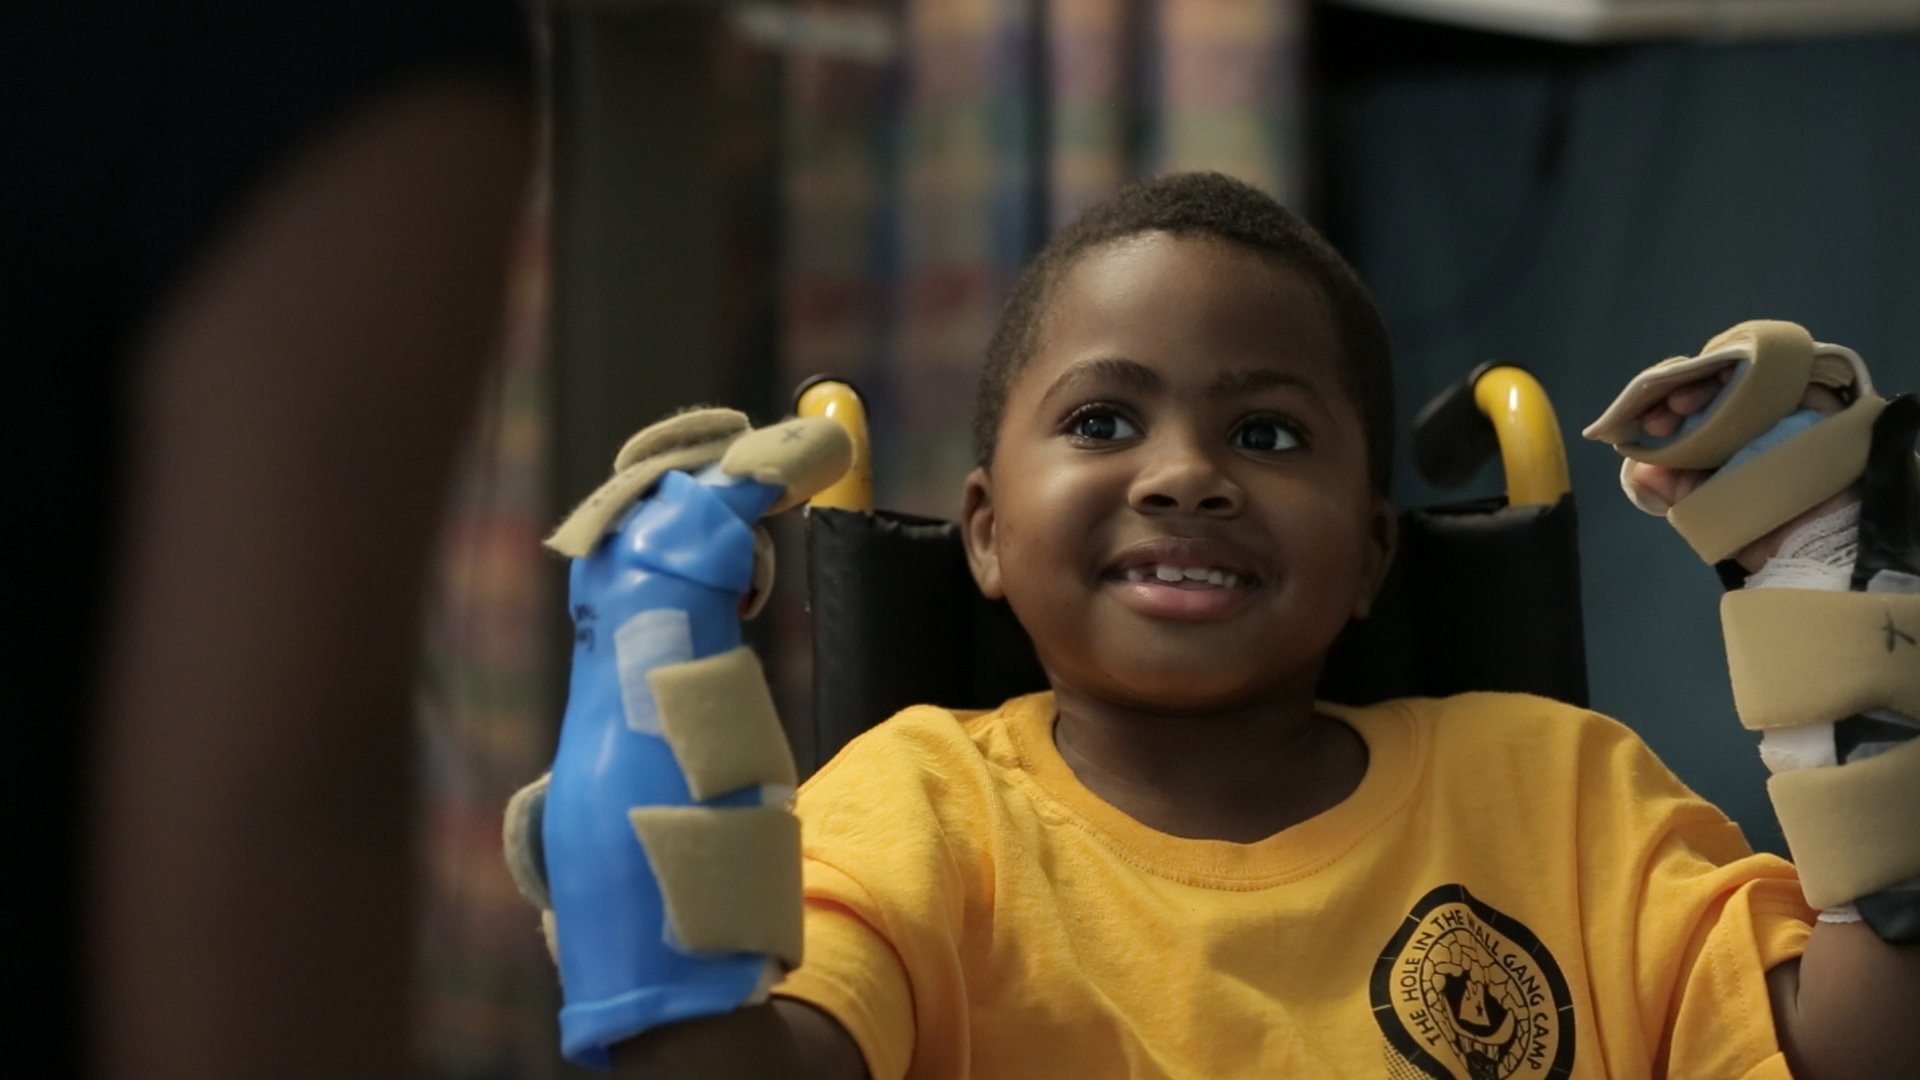 A team of 12 surgeons and other medical professionals at the Children's Hospital of Philadelphia successfully completed a double hand transplant. The patient -- 8-year-old Zion Harvey -- had his hands amputated at the age of 2 due to a life-threatening sepsis infection.